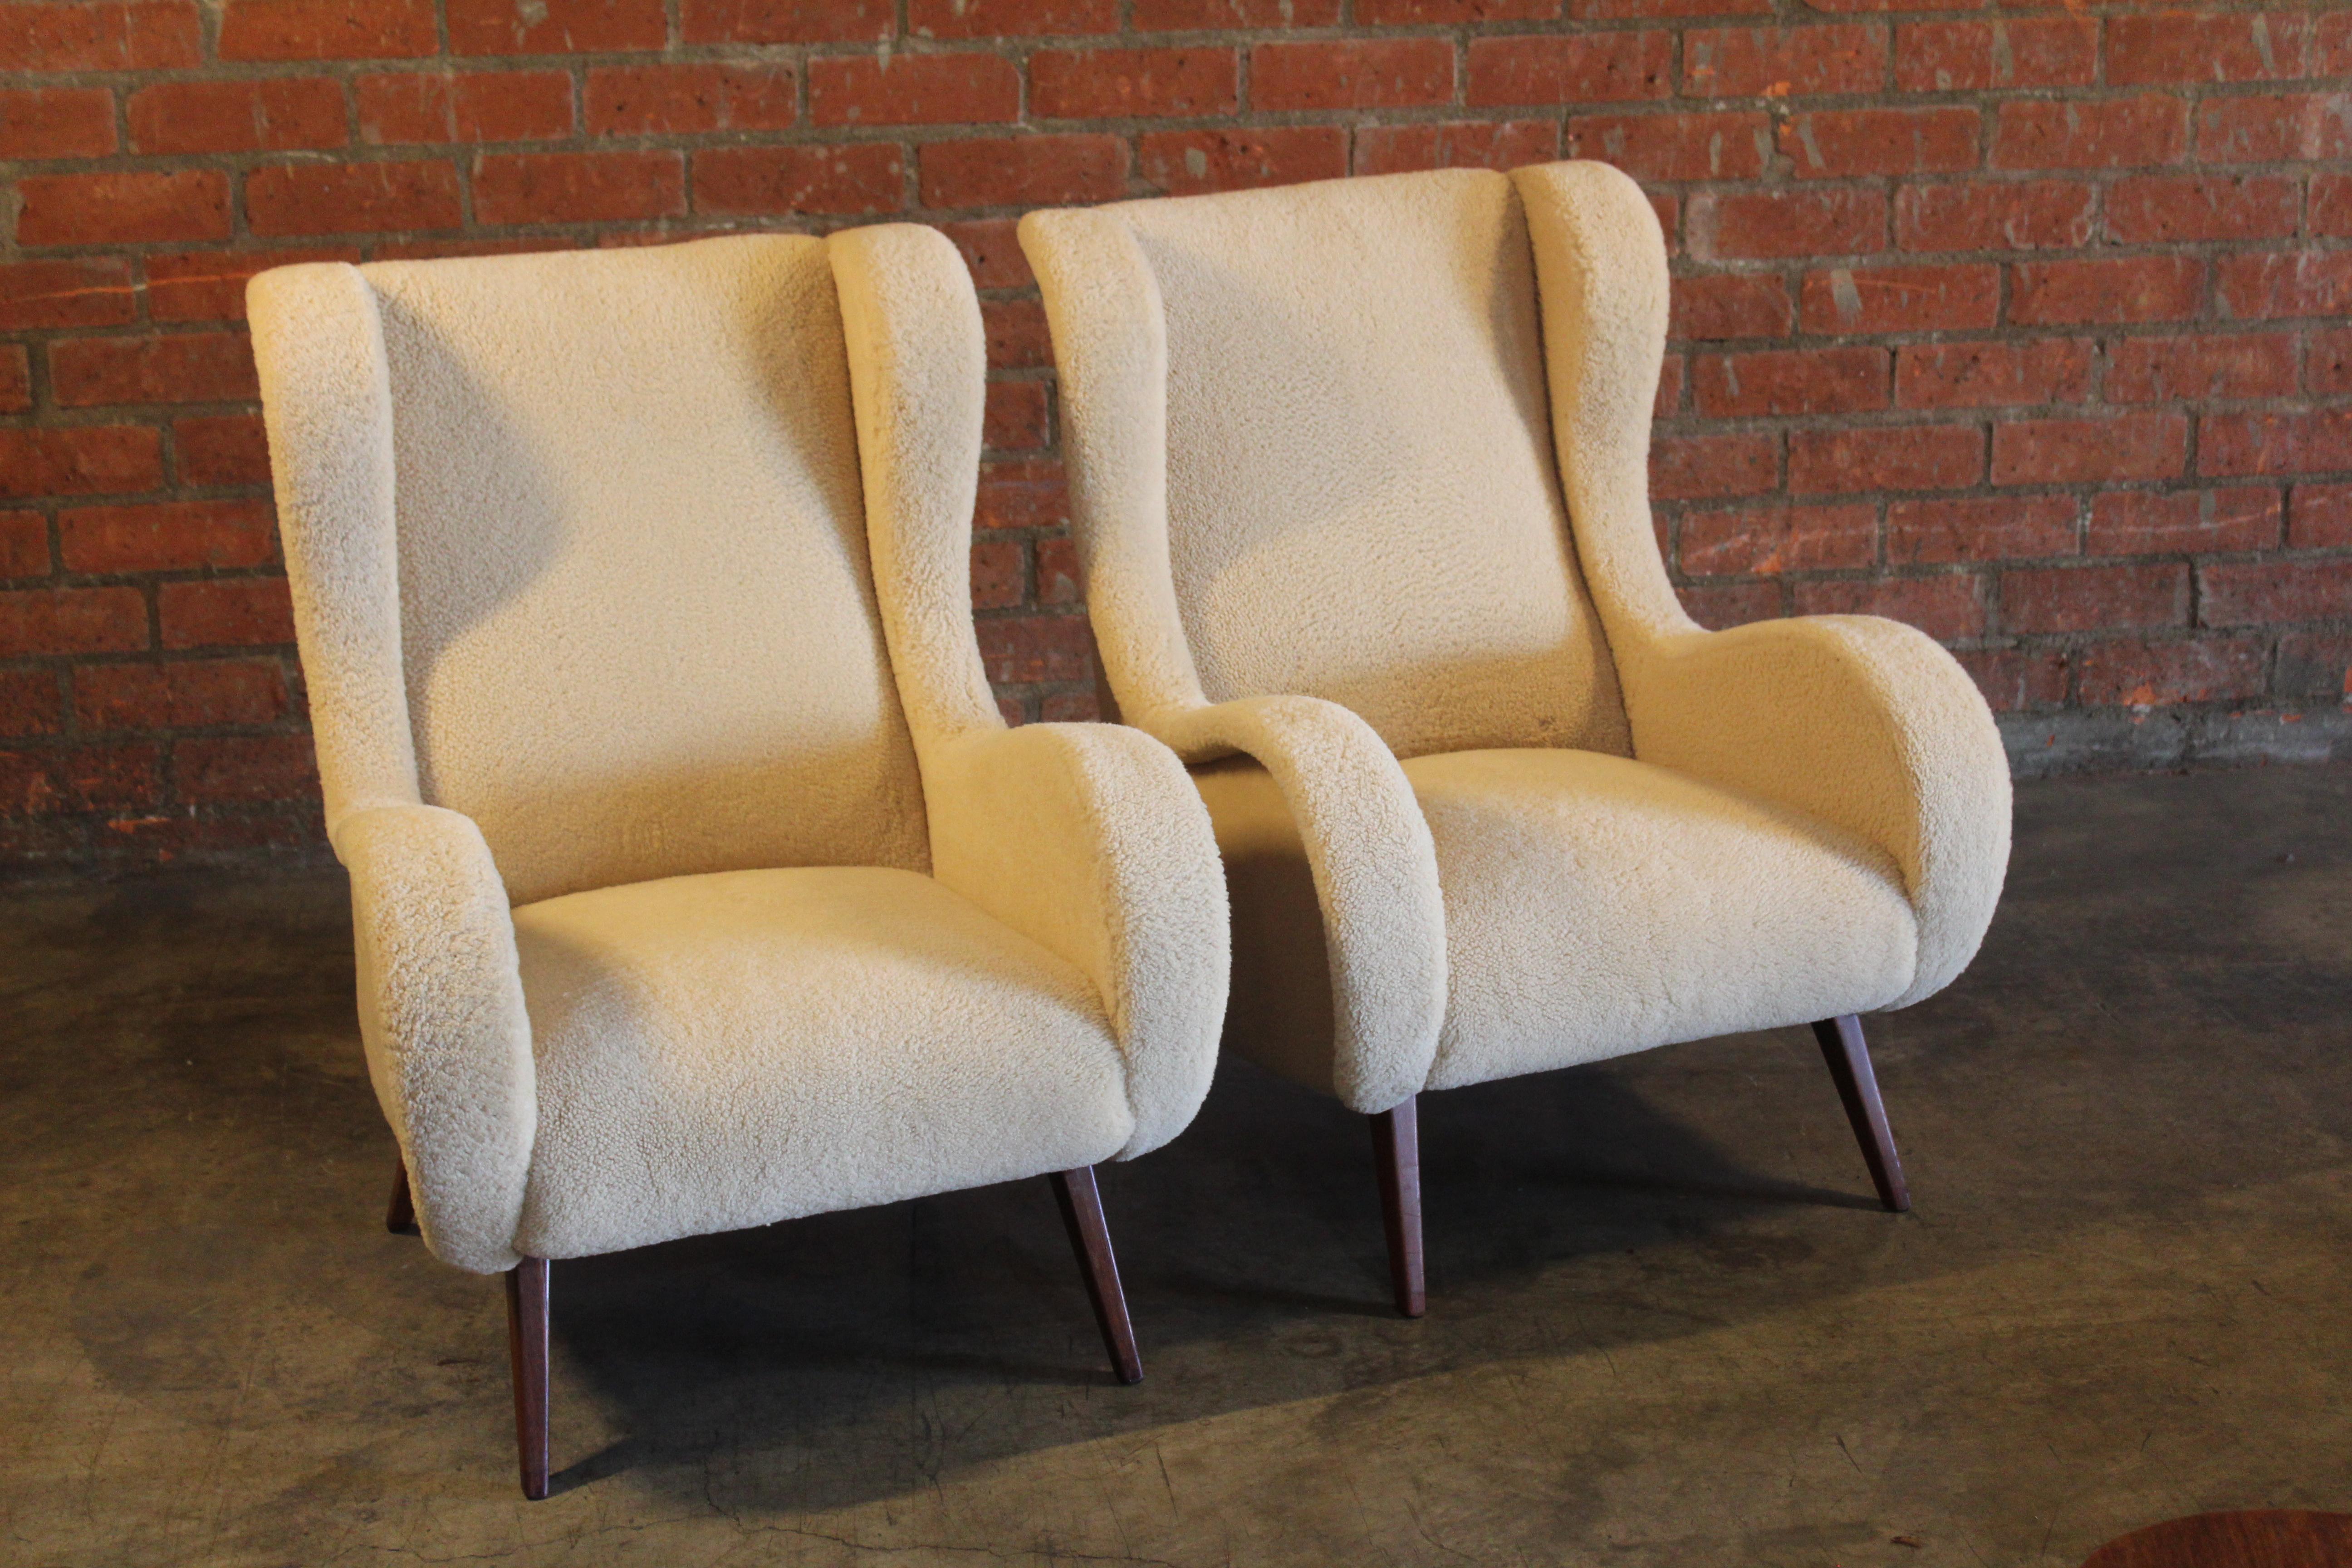 Pair of vintage 1950s armchairs attributed to Marco Zanuso. Newly upholstered in sheepskin. They feature walnut tapered legs. In overall excellent condition. The walnut legs show minor wear and were touched up.